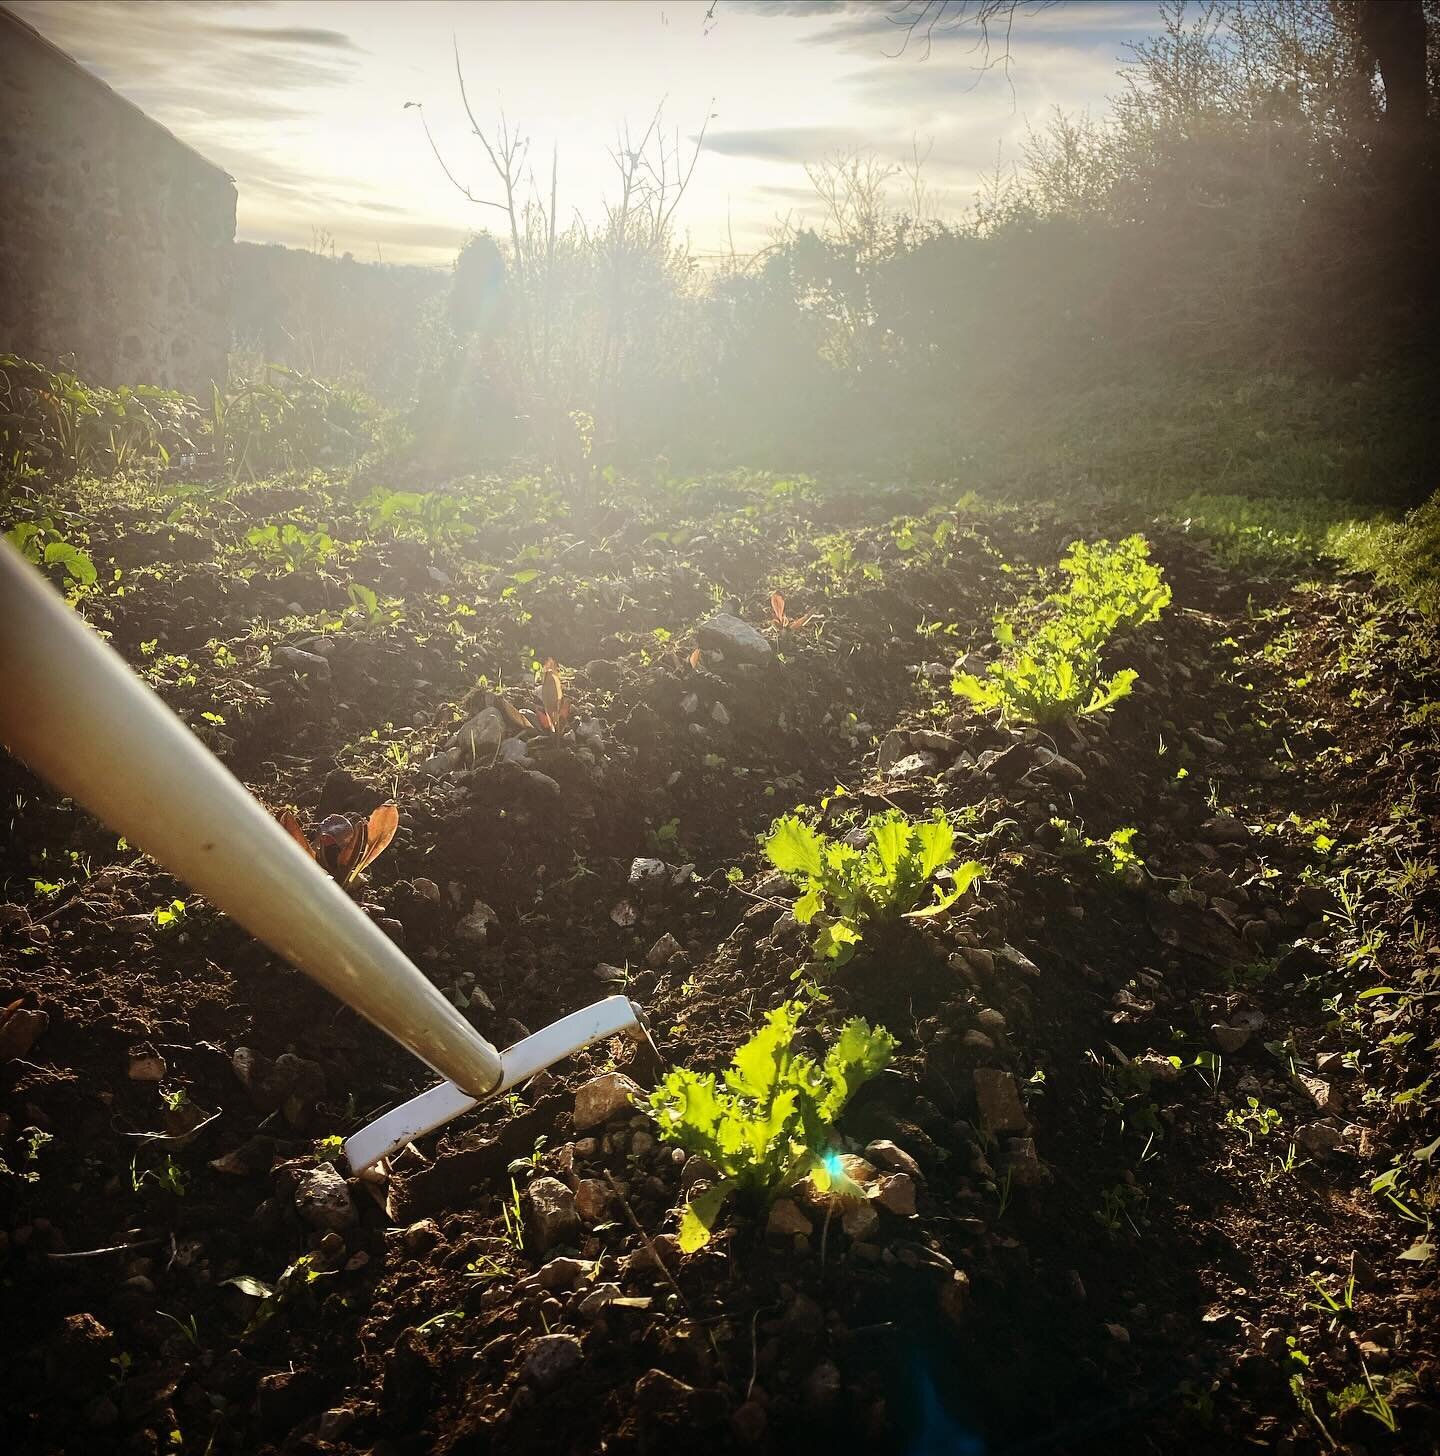 This is the time of the year that I appreciate my Sardinia the most. When my dear and near ones are shuffling snow in the dark morning and I&rsquo;m weeding the veggie garden&hellip; 🌱🌱🌱